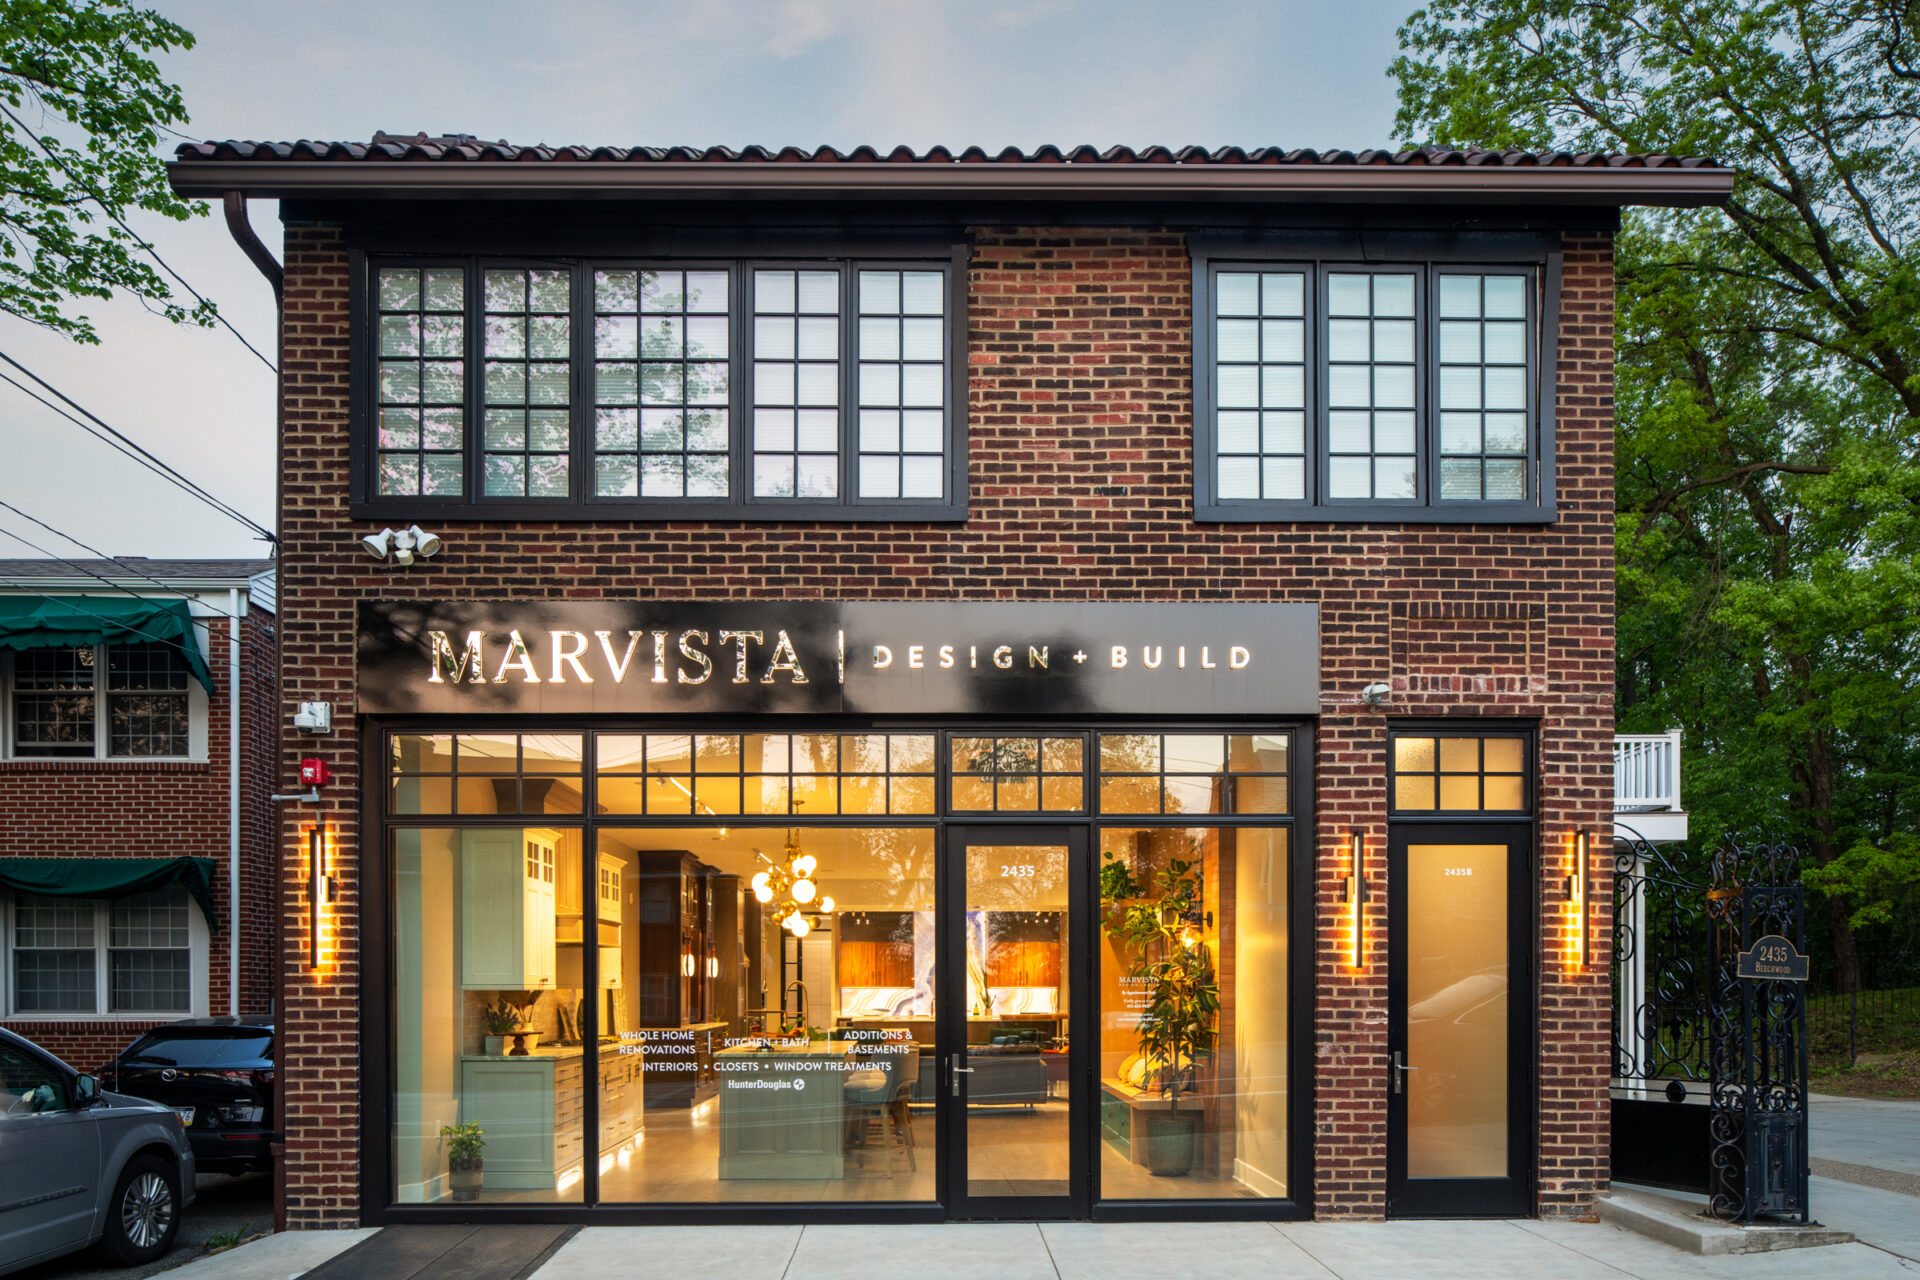 Marvista location. Small two-story brick building with black-framed windows and well-lit showroom inside first floor.